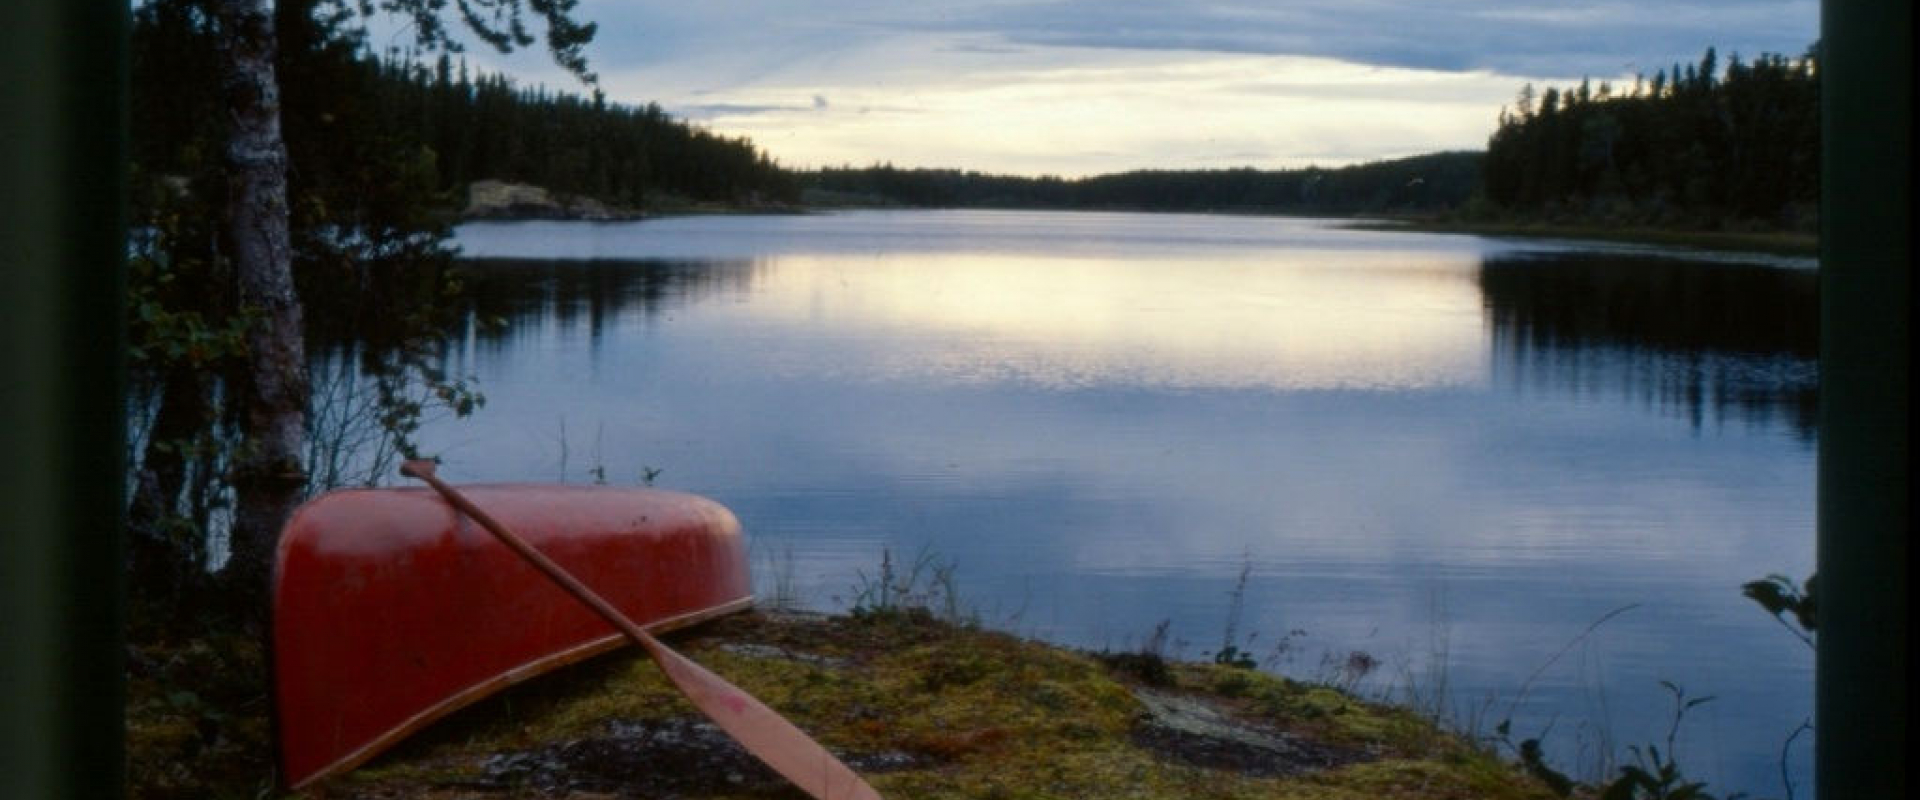 A red canoe and paddle lie near the shoreline of a campsite at dusk.